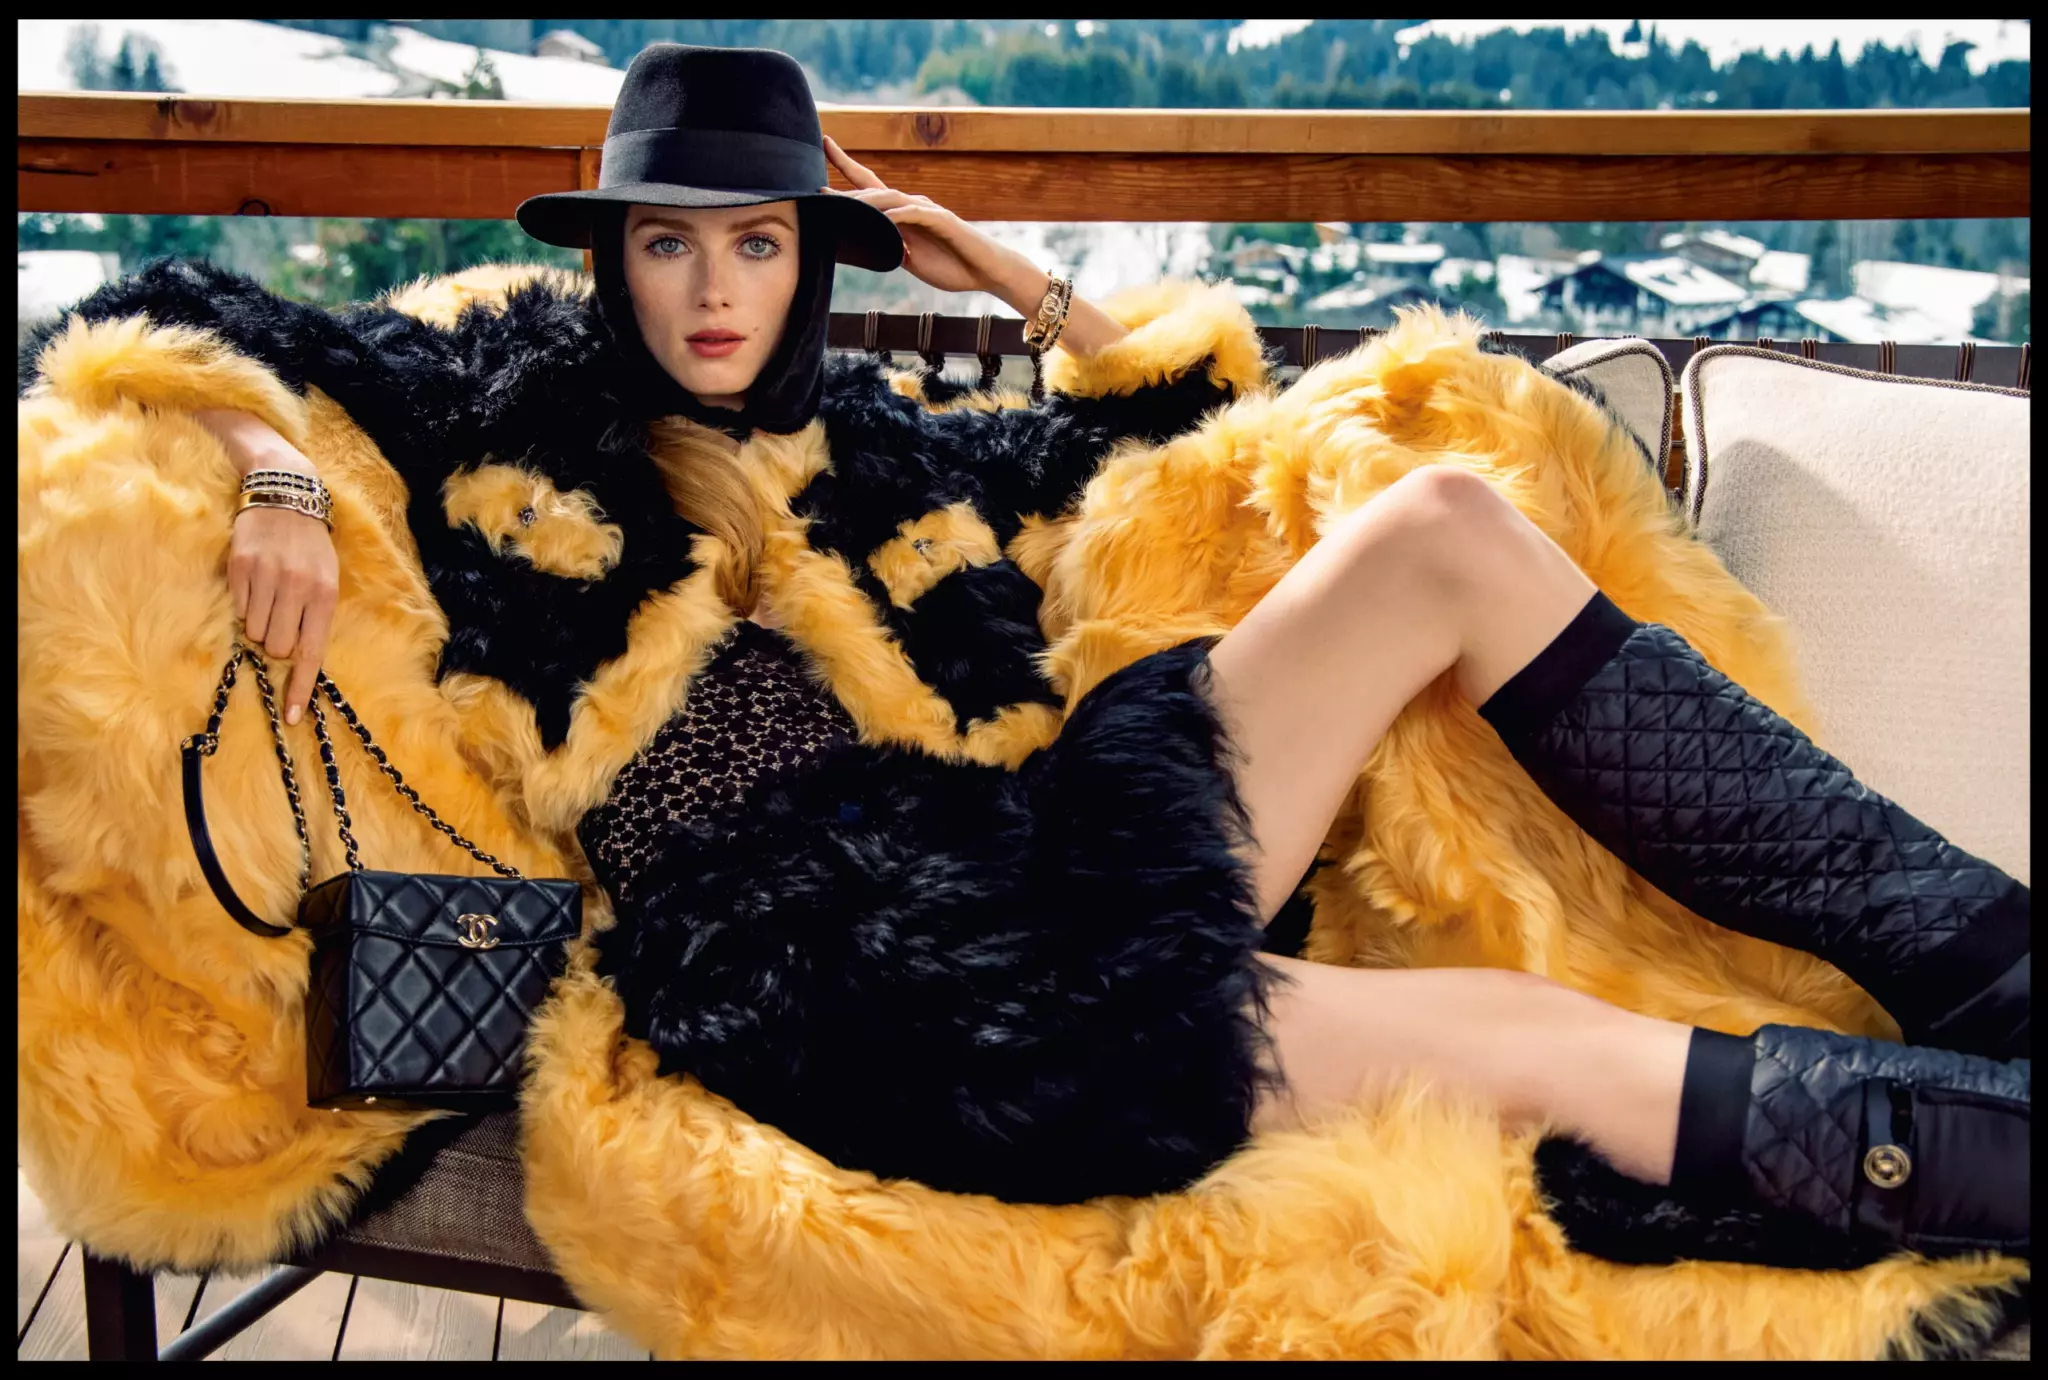 Fall-Winter 21/22 trends that fashionistas will adopt this season. Focus on iconic Chanel, Baum und Pferdgarten, By Malina and By Malene Birger. 10